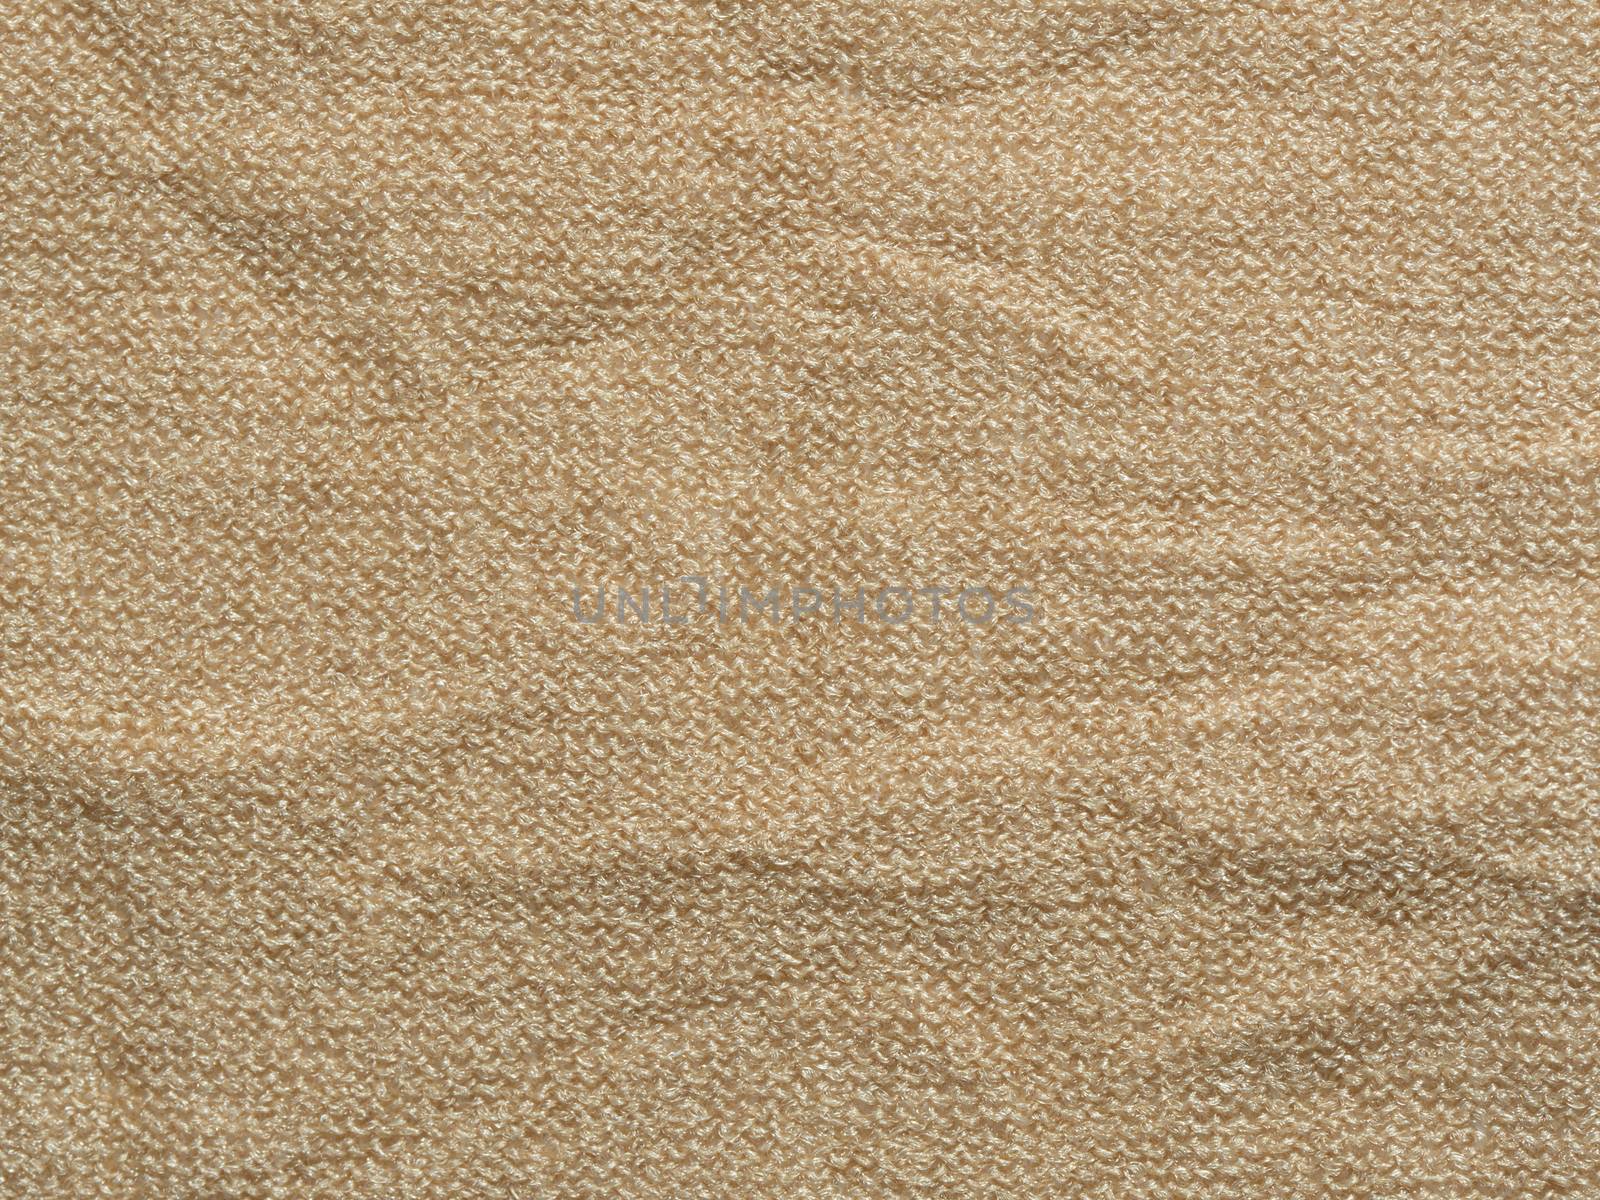 soft nude knitted stocking texture use as background